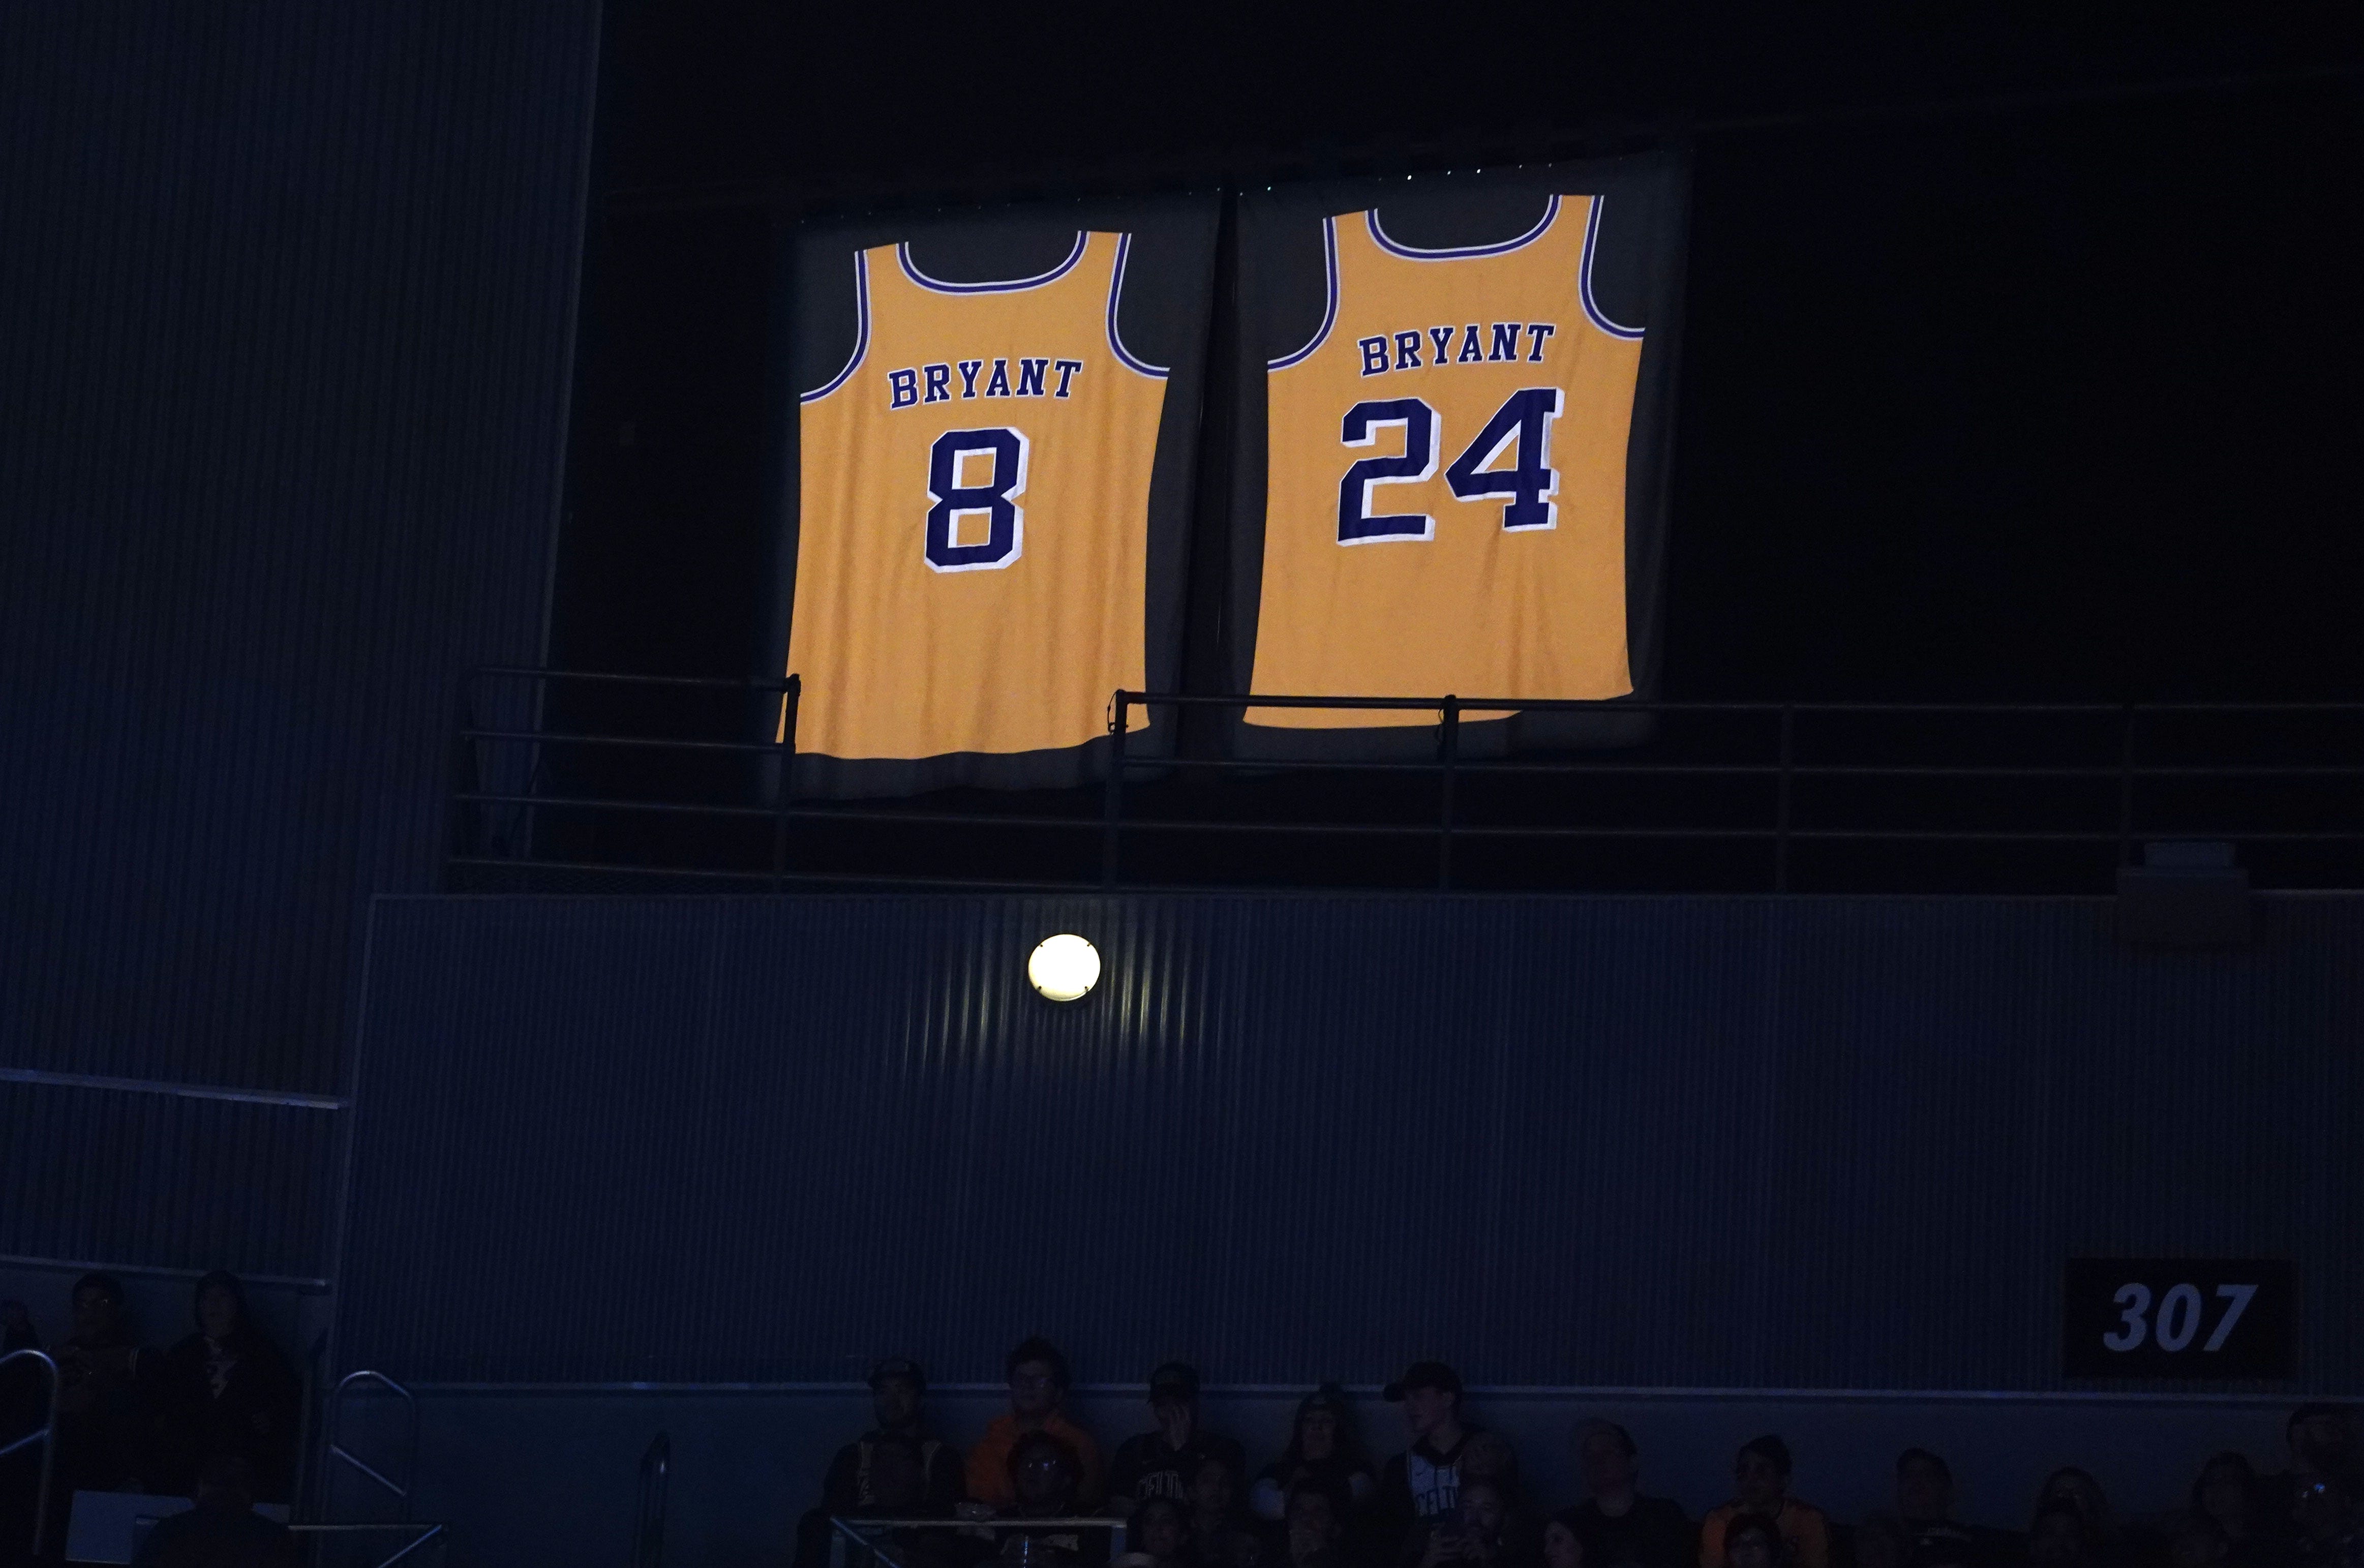 lakers 8 and 24 jersey